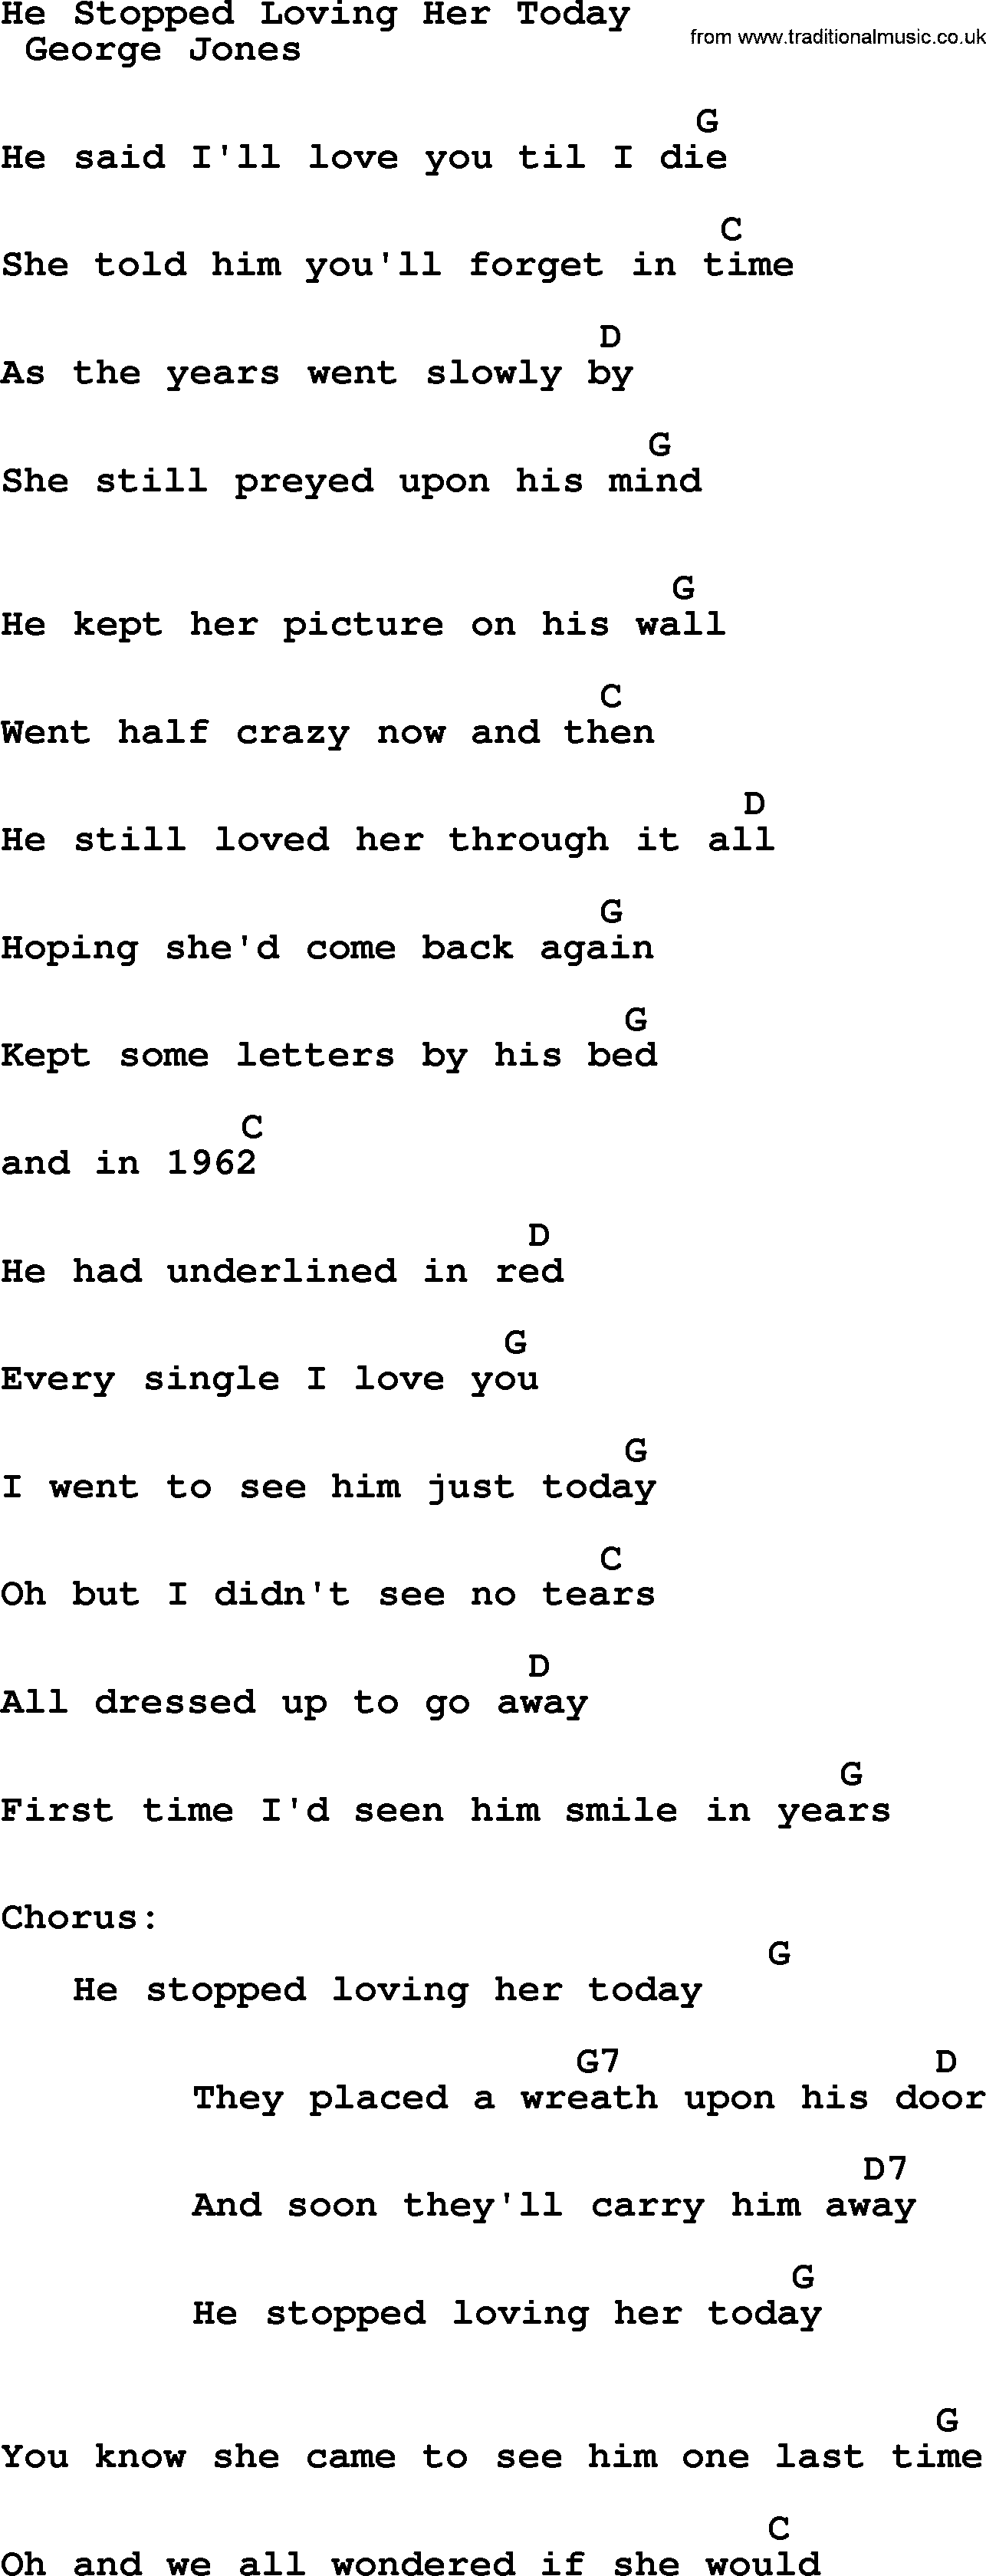 George Jones song: He Stopped Loving Her Today, lyrics and chords